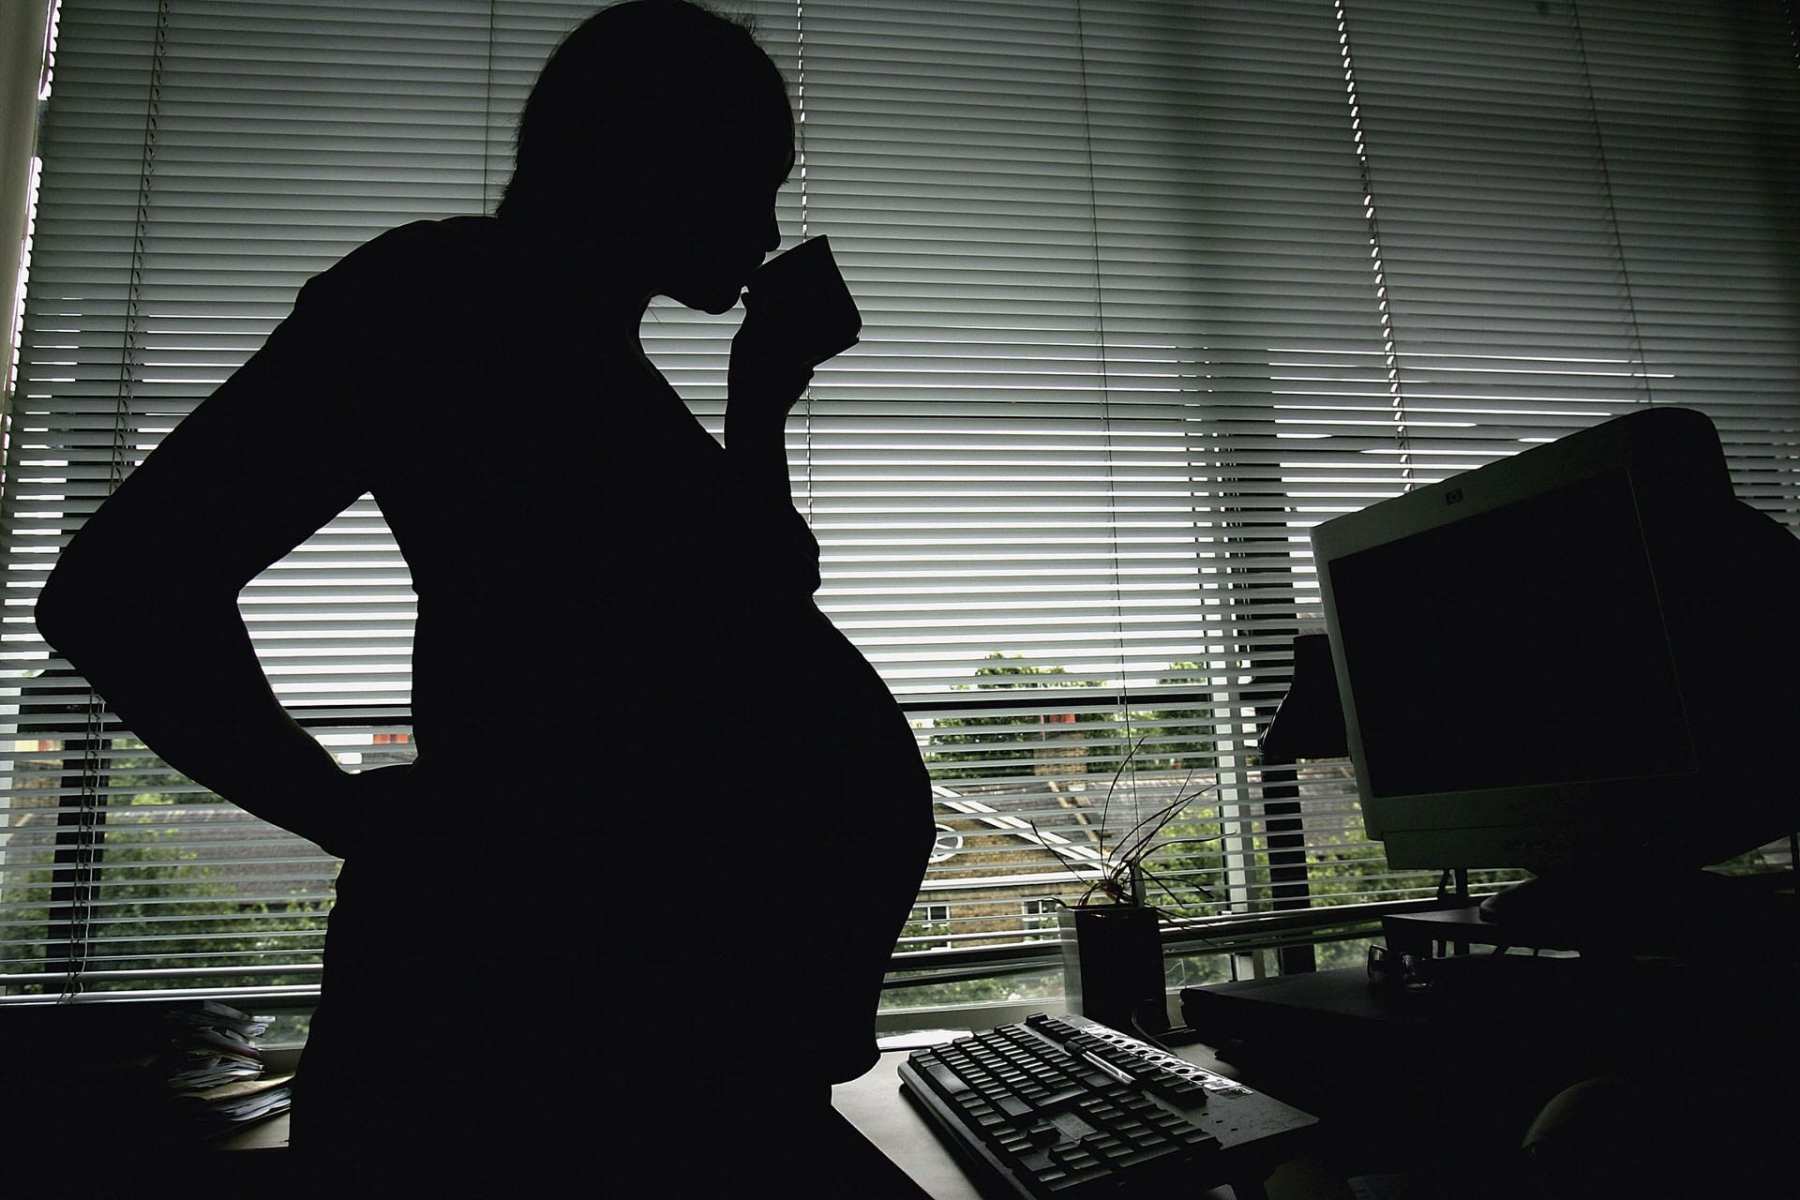 A silhouette of a pregnant woman.